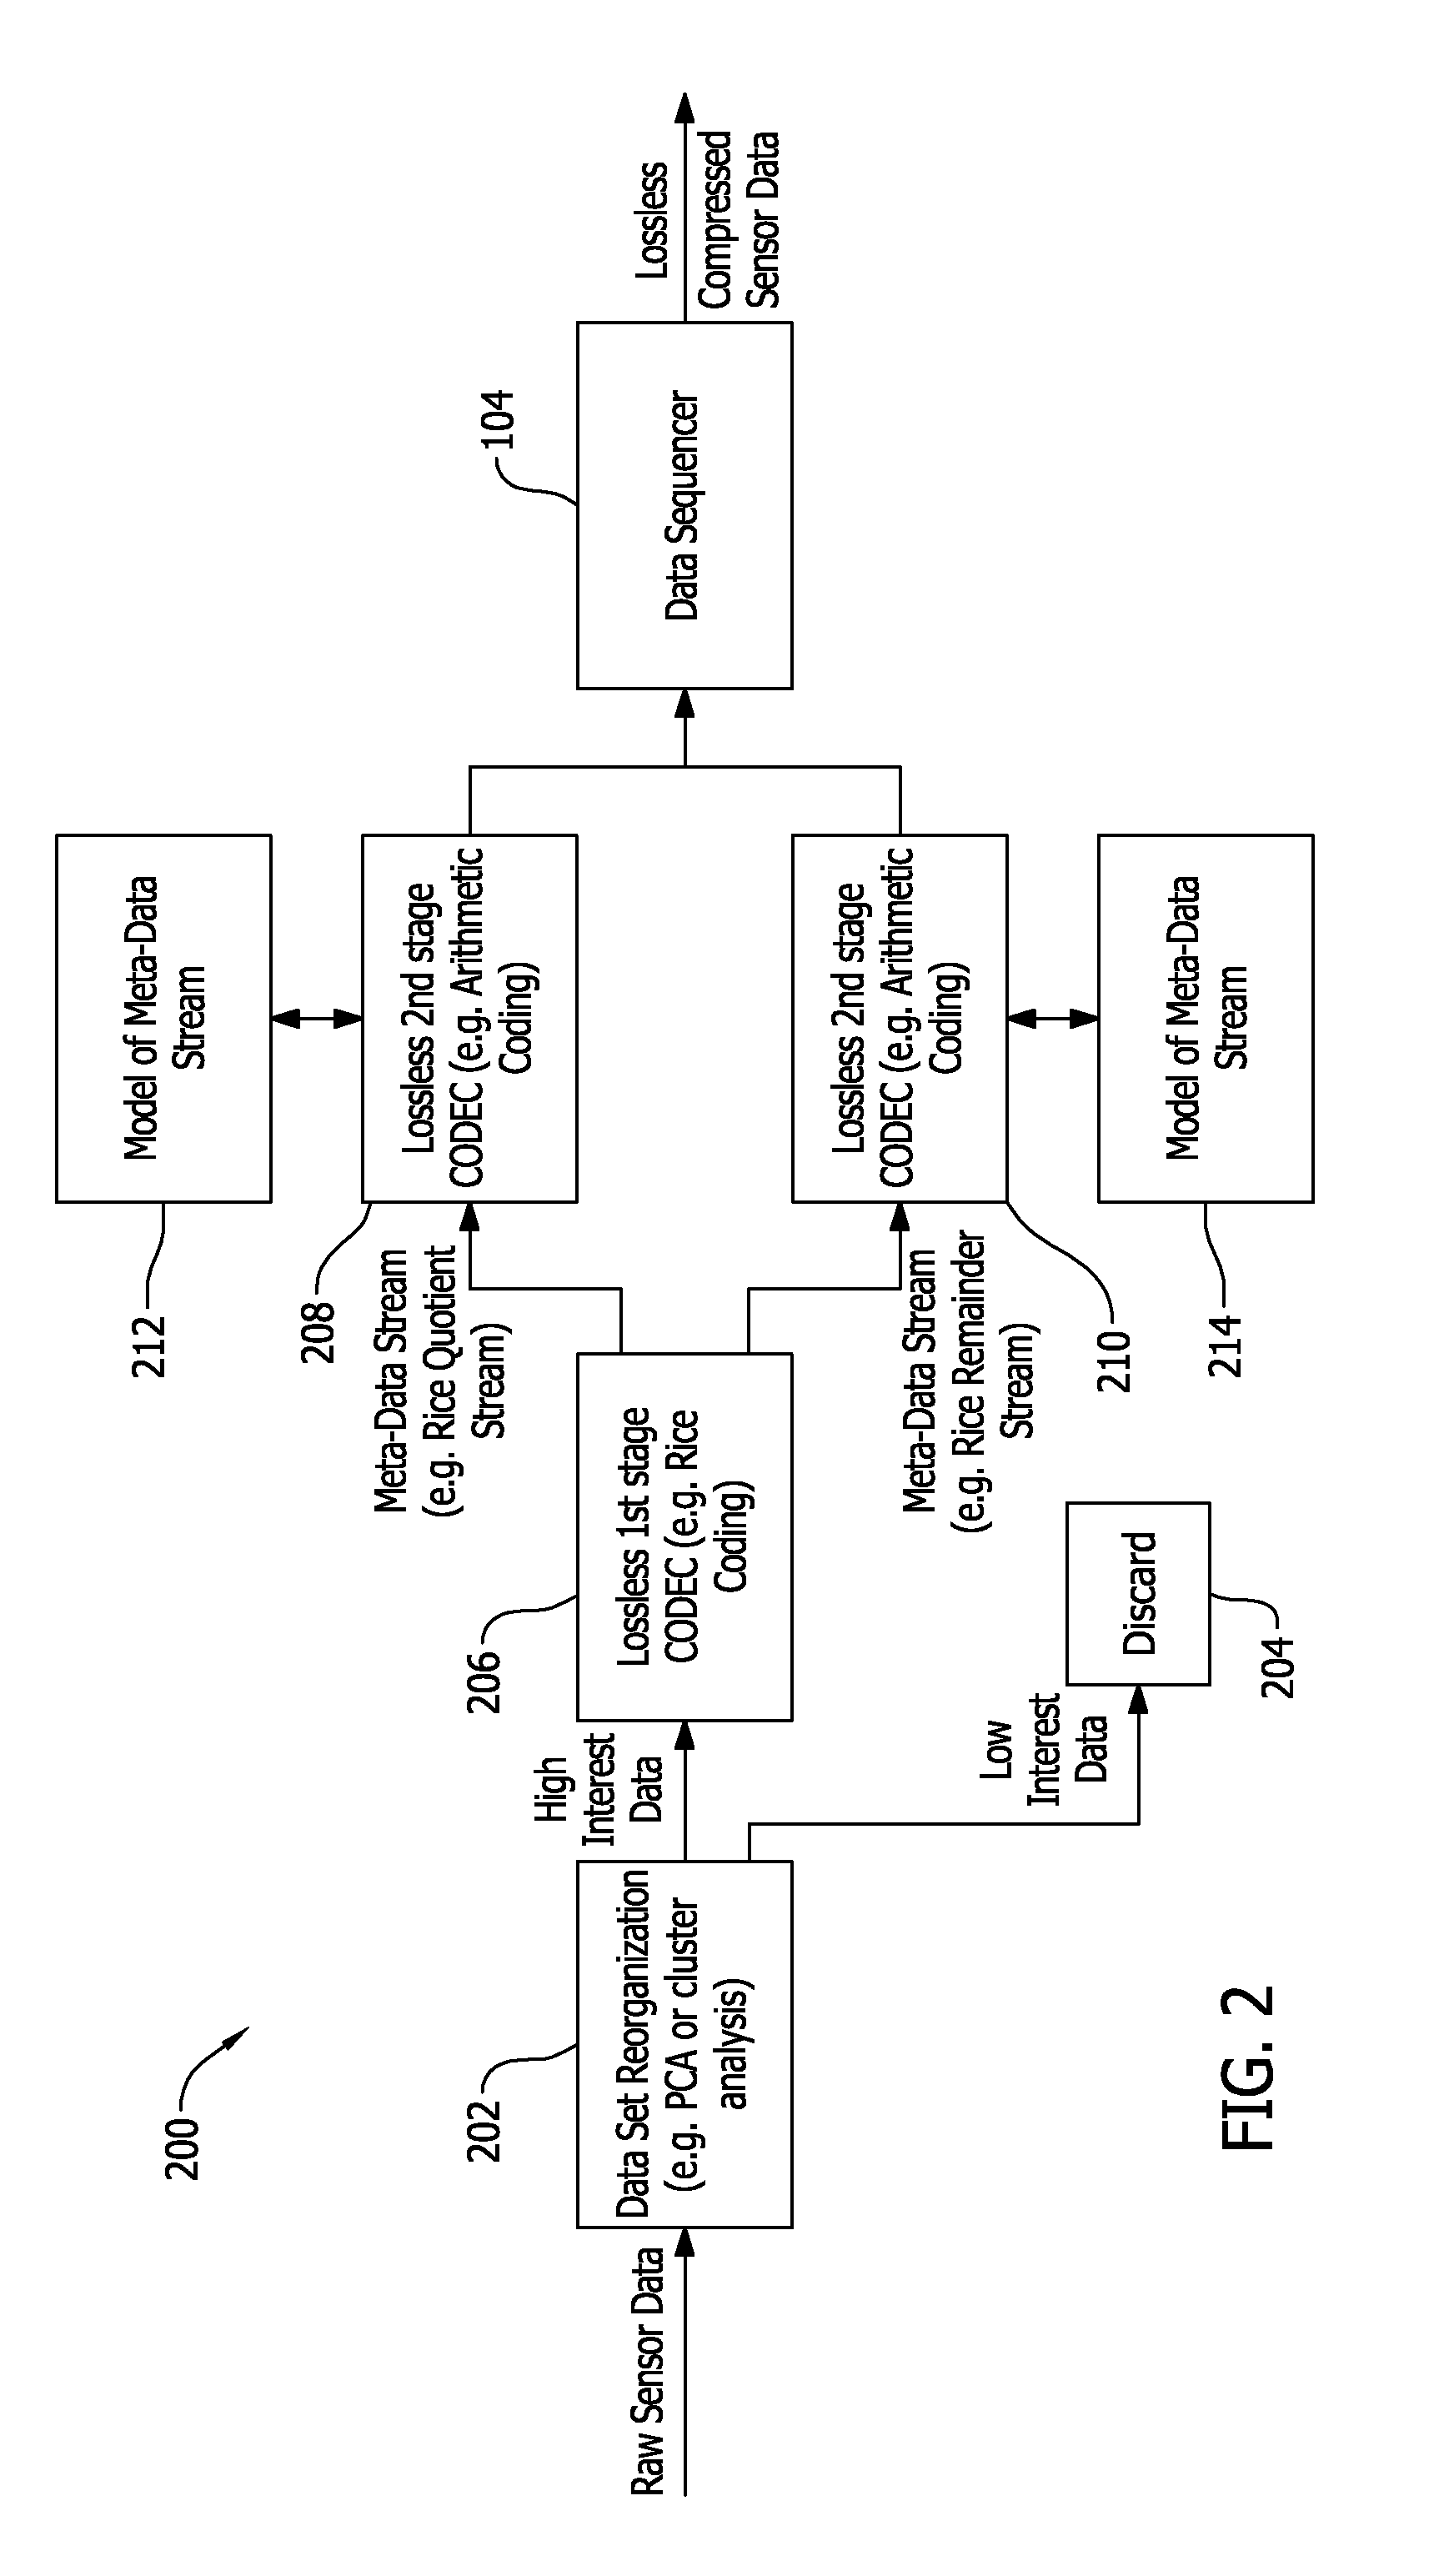 Method and apparatus for compression of generalized sensor data